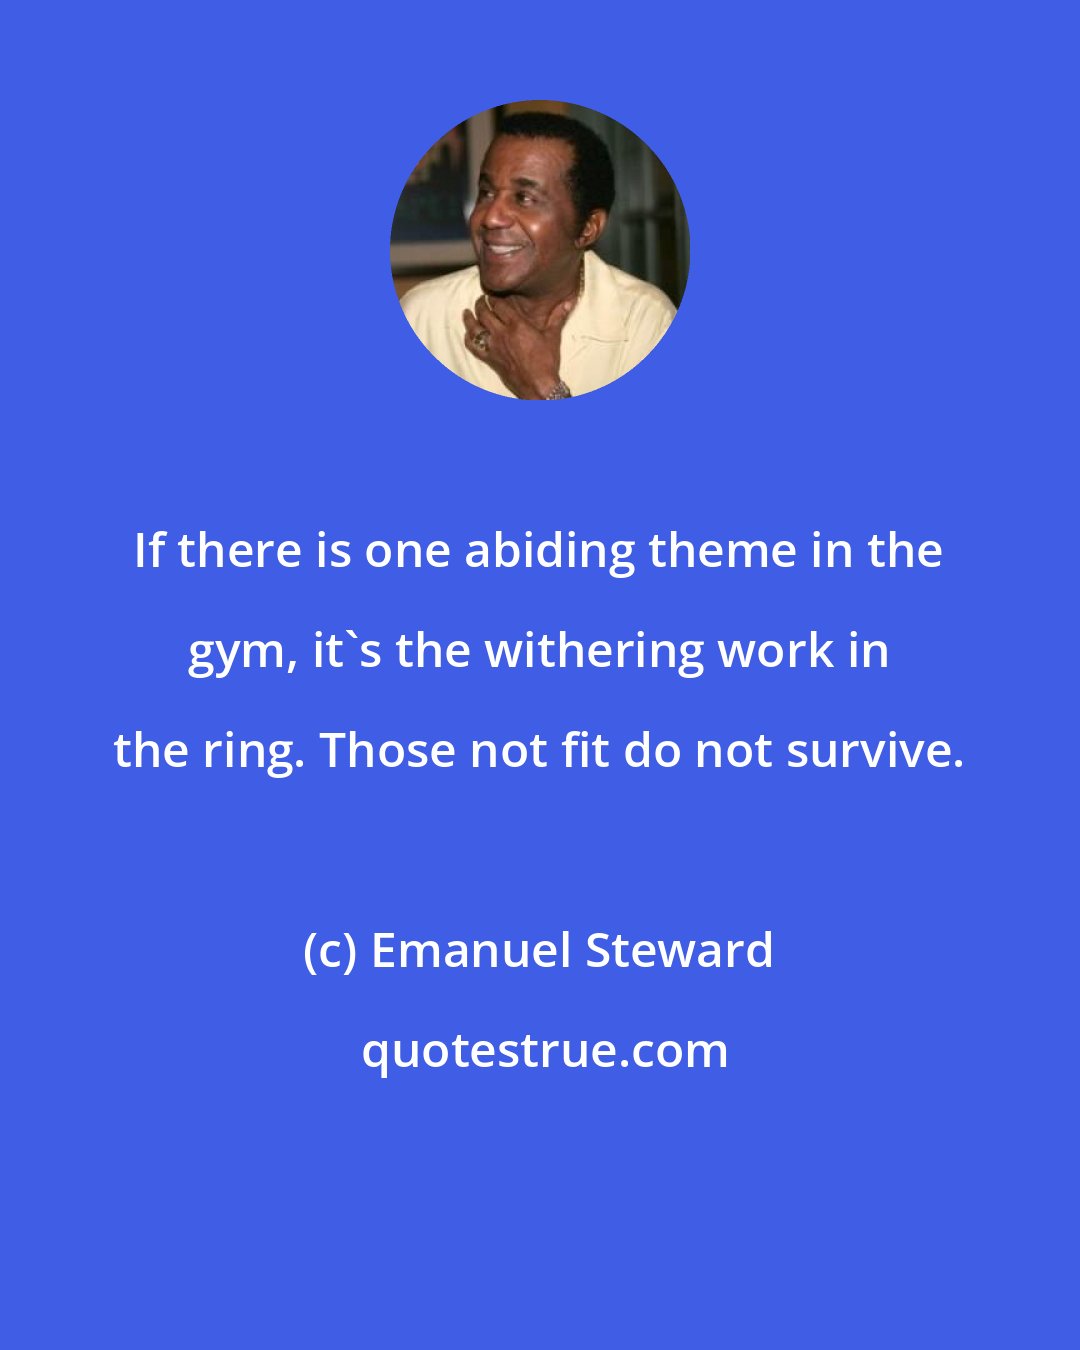 Emanuel Steward: If there is one abiding theme in the gym, it's the withering work in the ring. Those not fit do not survive.